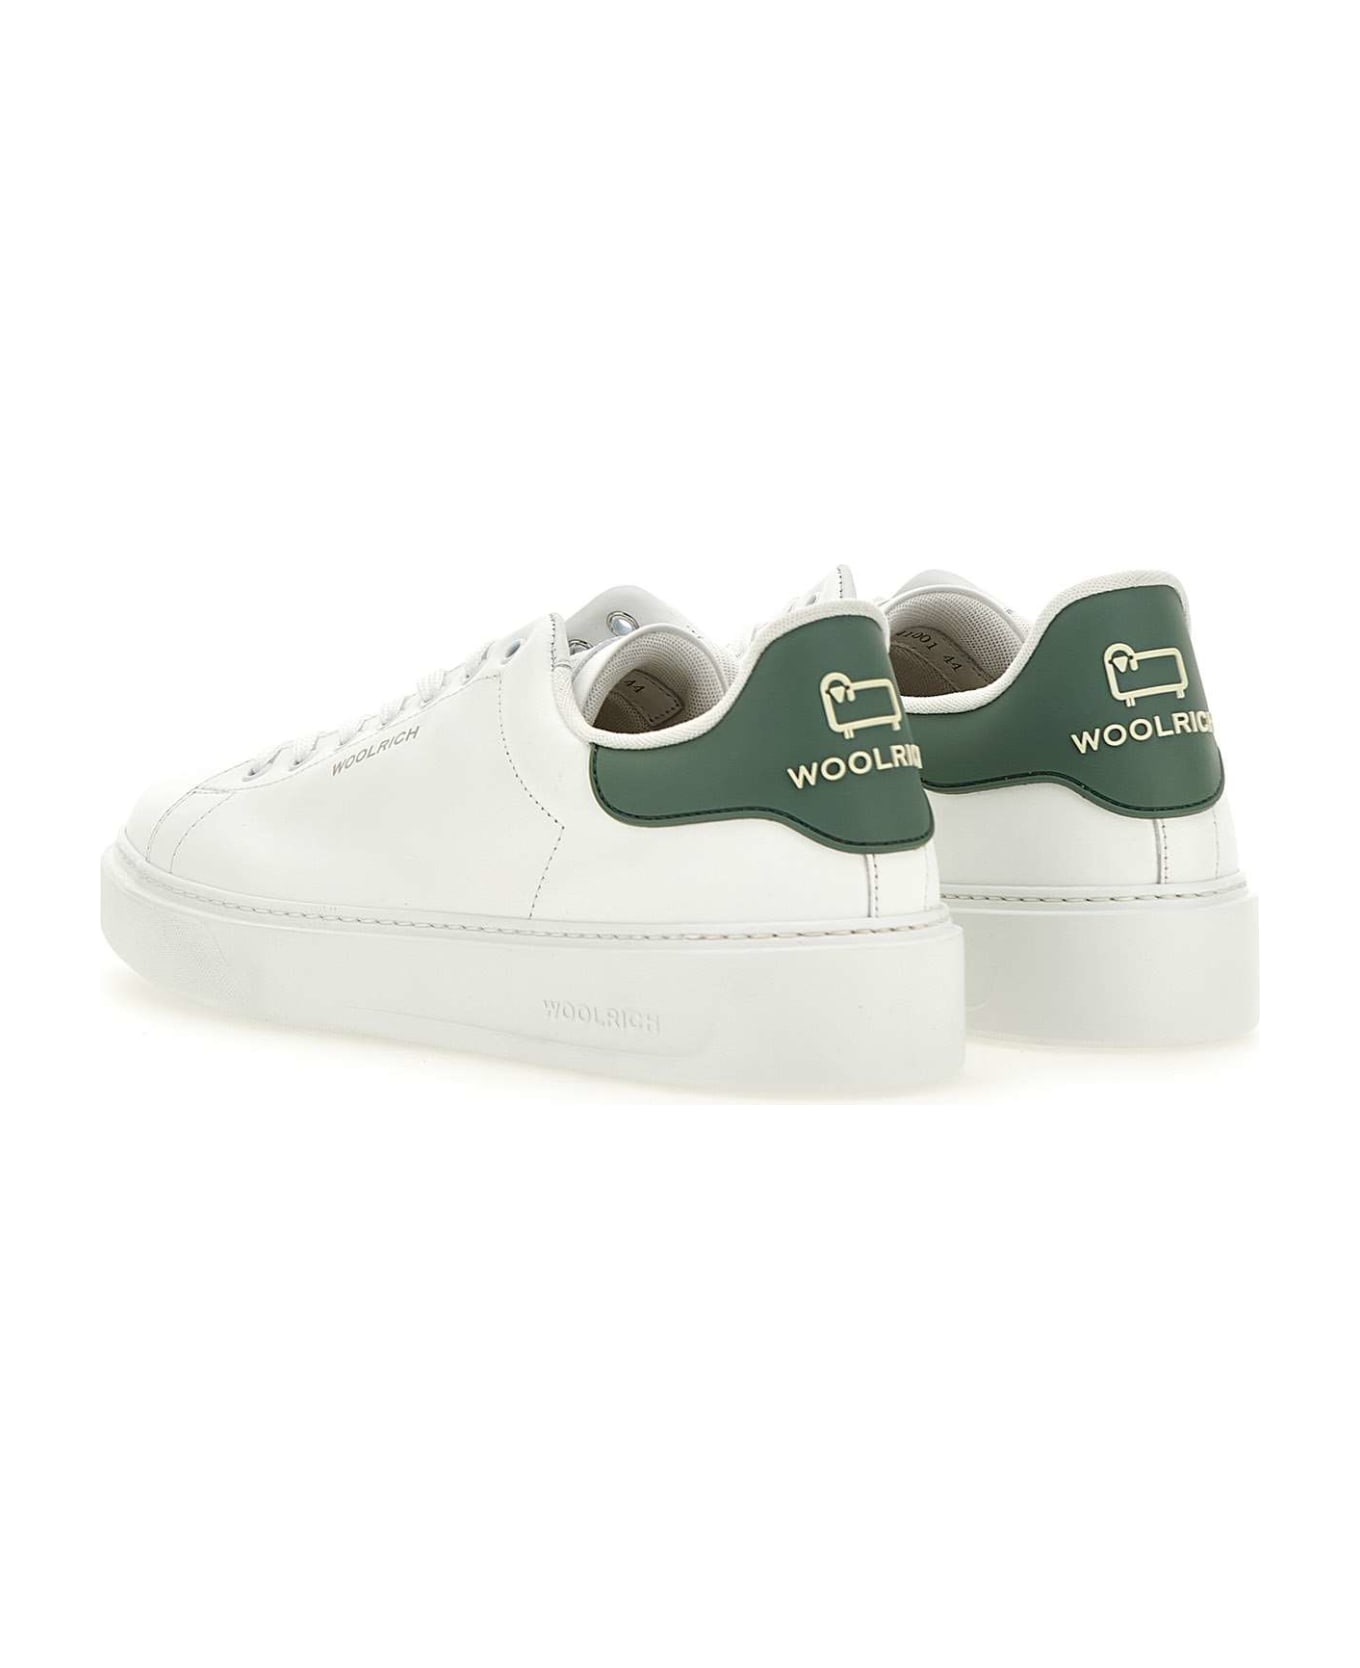 Woolrich Leather Sneakers